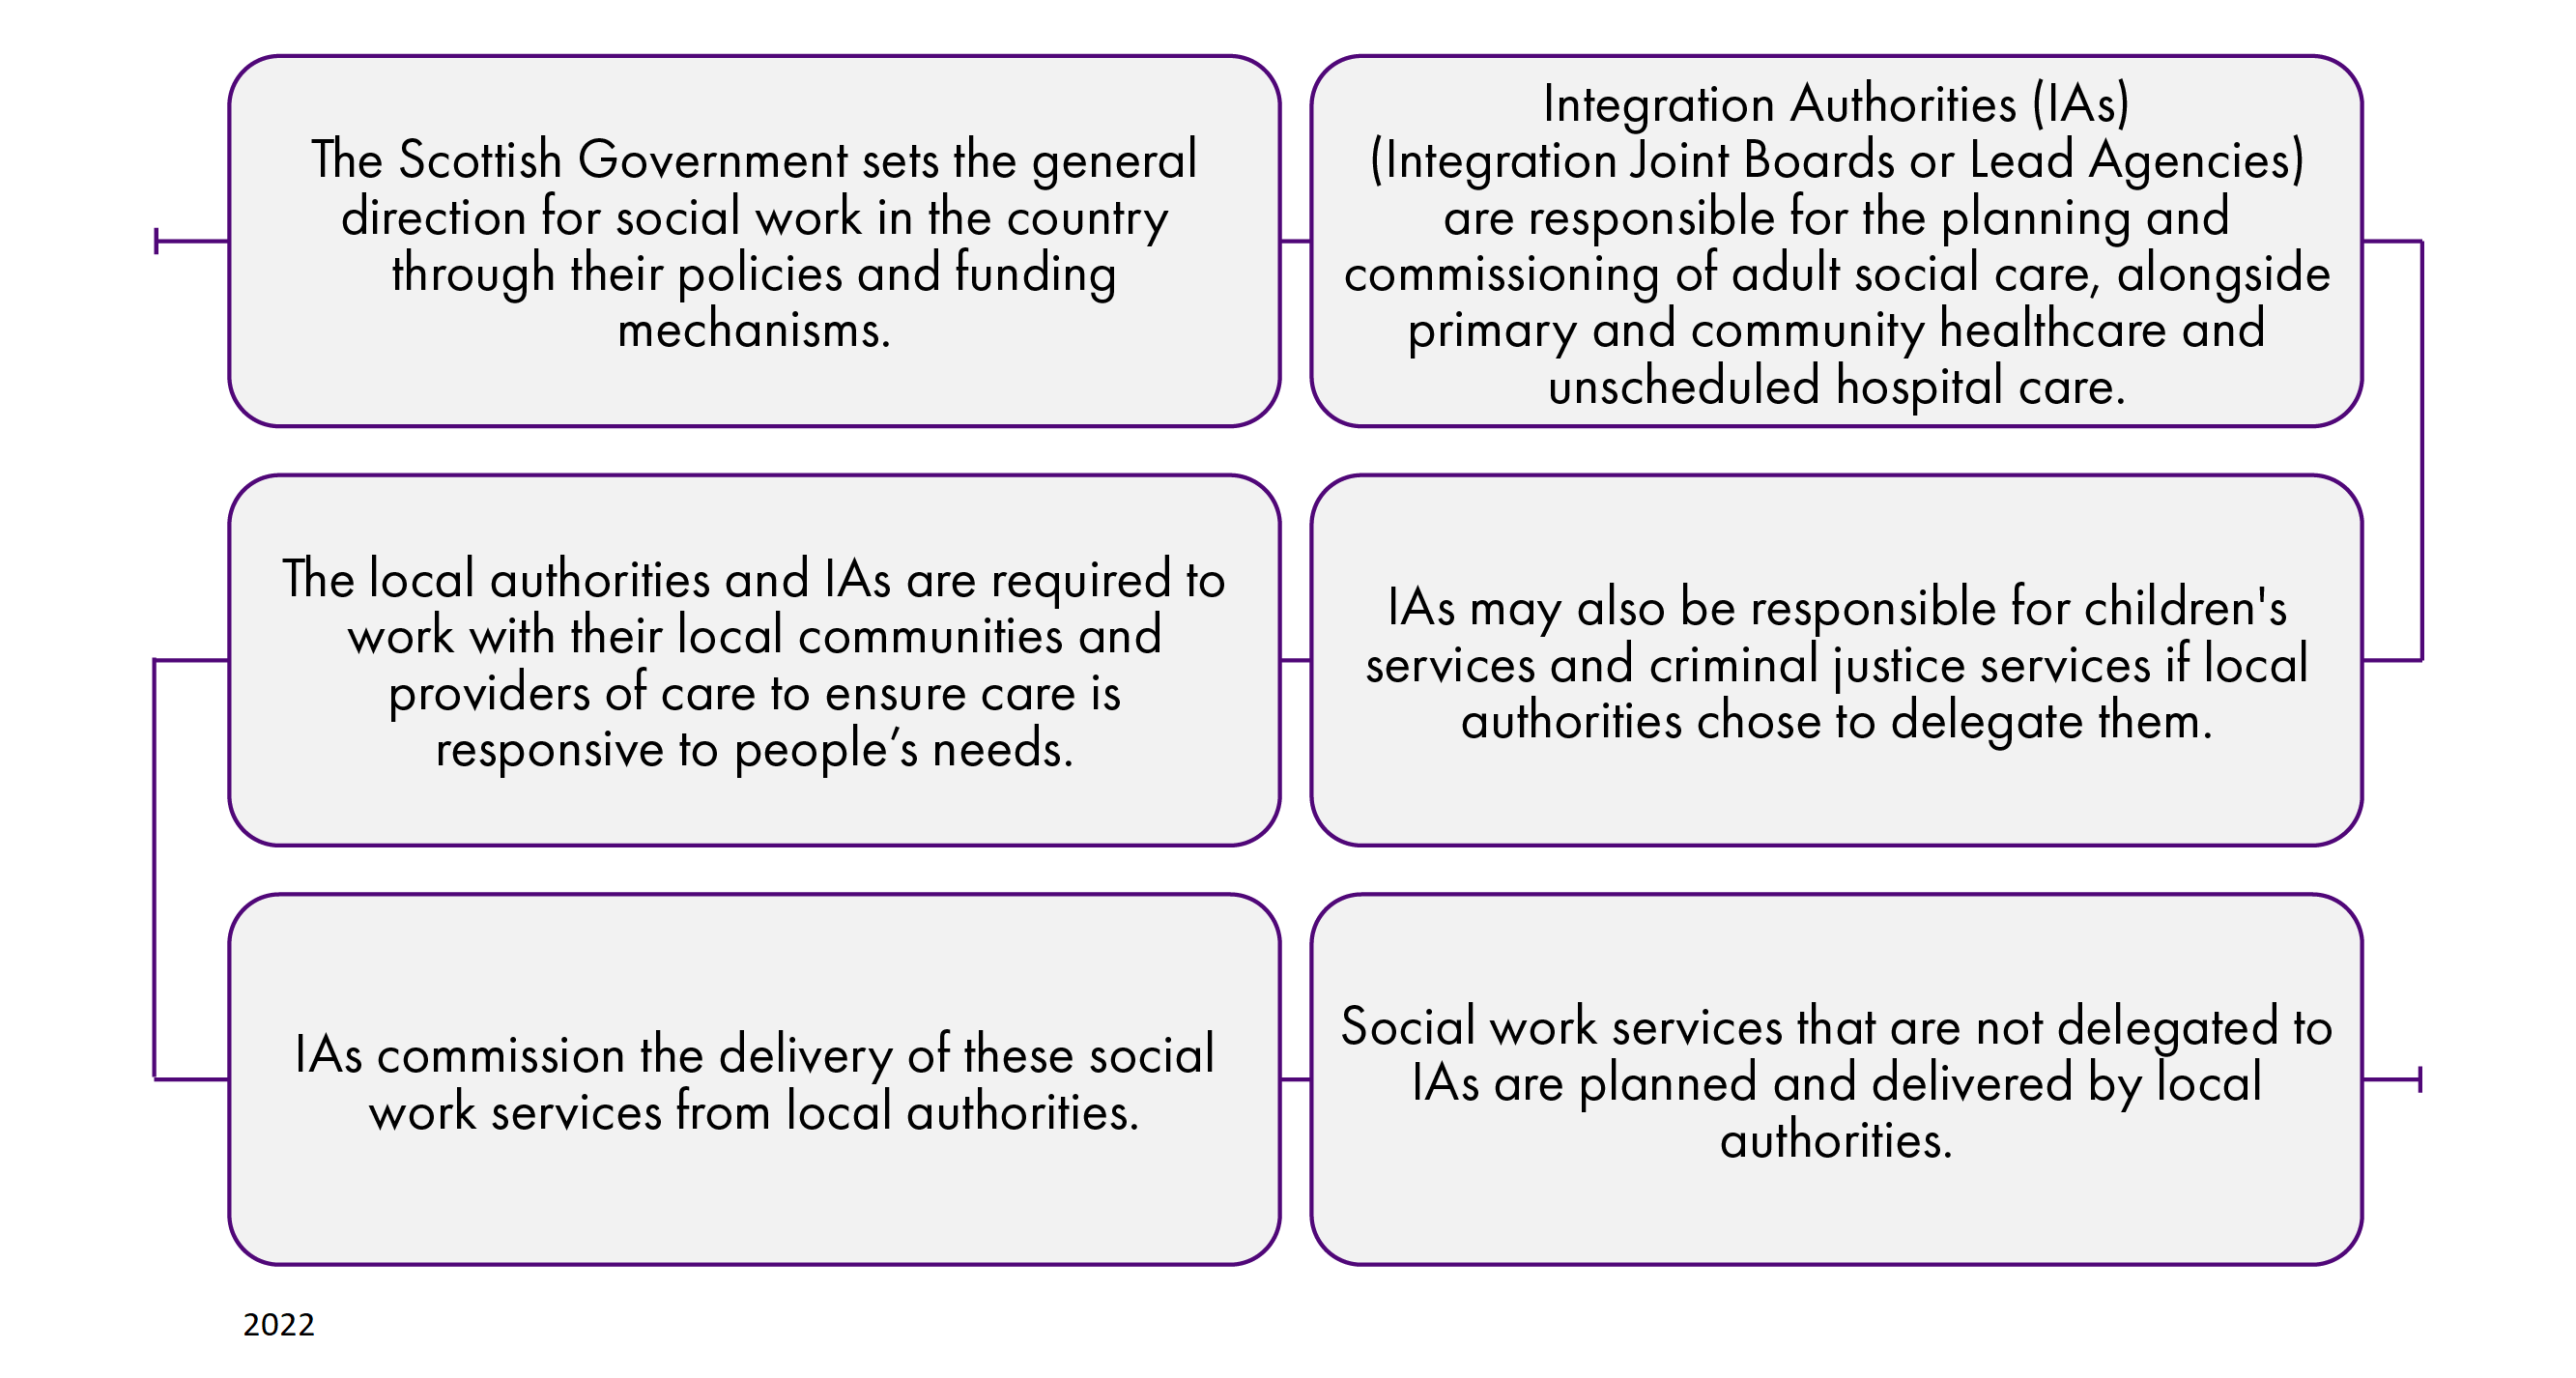 A flow diagram summarising the way social work is organised and delivered, from policy direction set by the Scottish Government, organisation by Integration Authorities, and delivery or commissioning of services by local authorities.